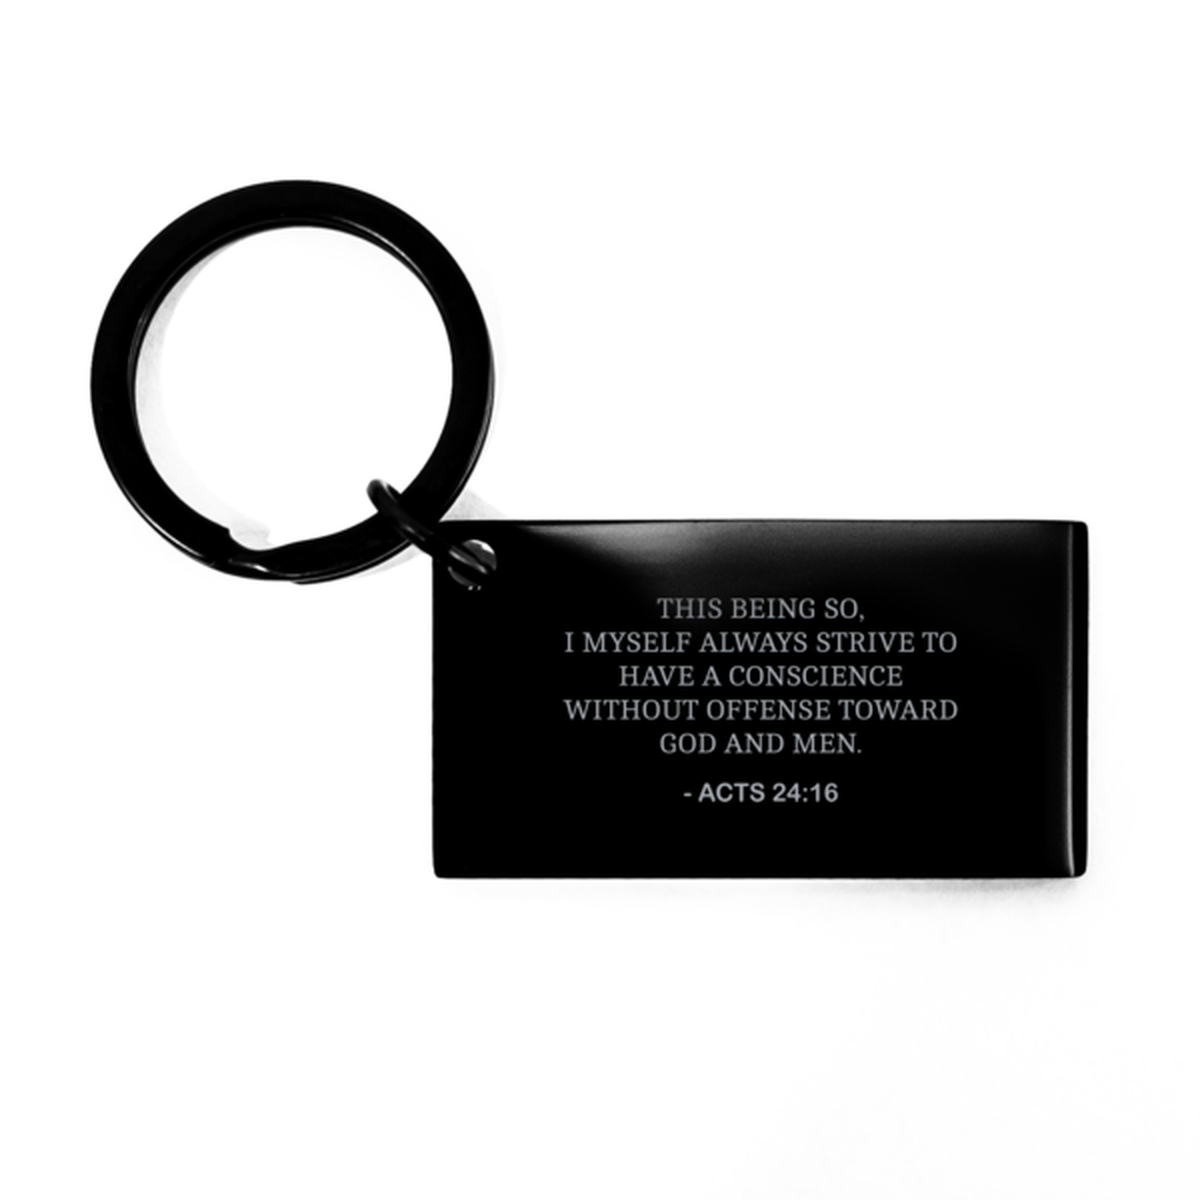 Bible Verse Black Keychain, Acts 24:16 This Being So, I Myself Always Strive To Have A, Christian Inspirational Key Ring Gifts For Men Women